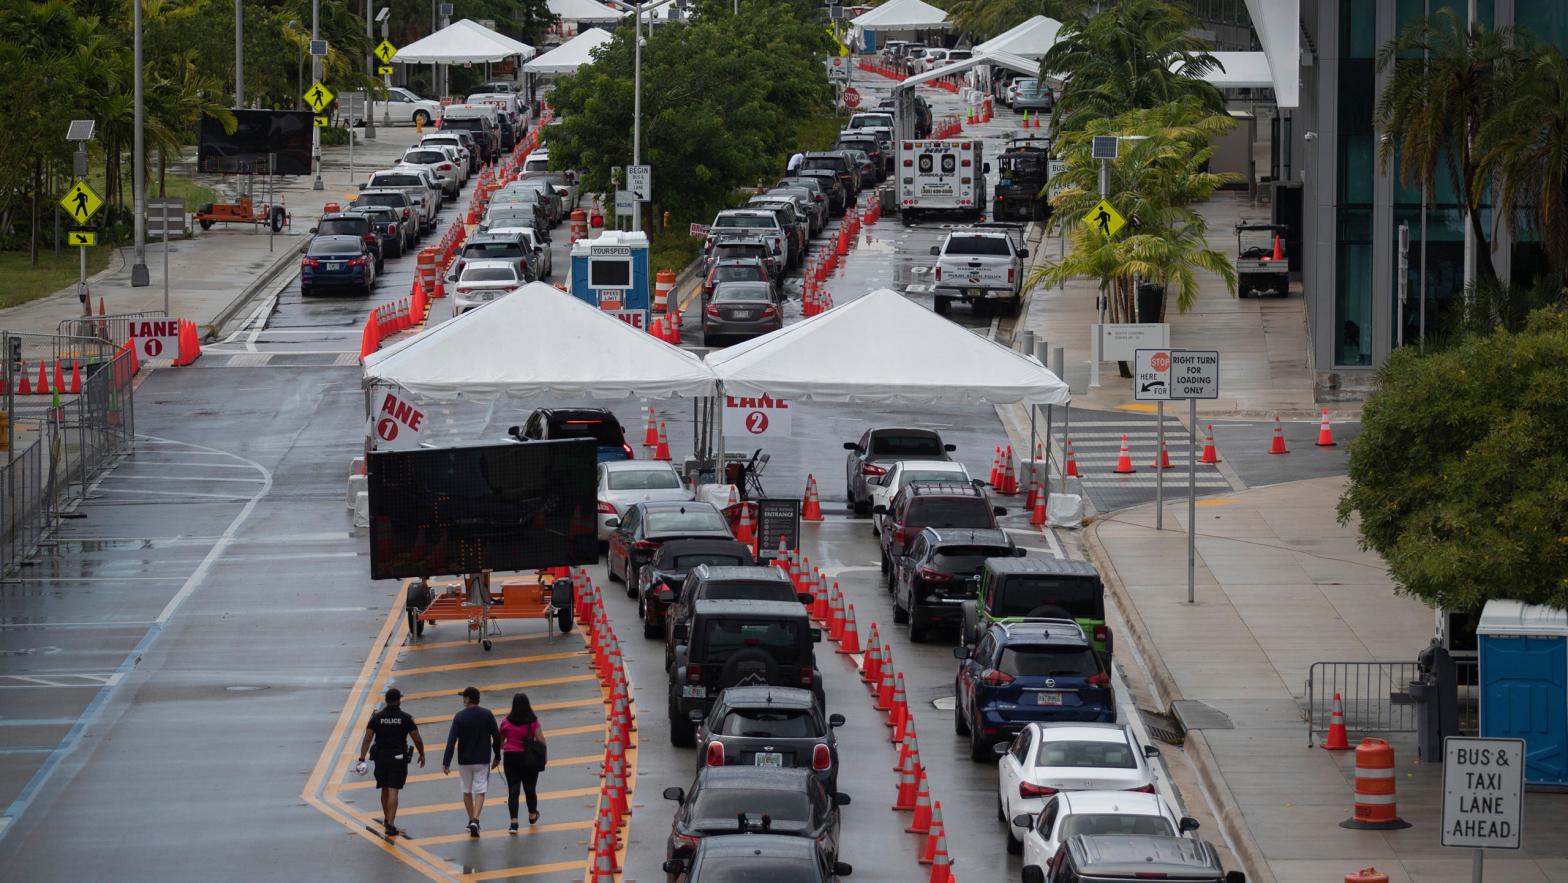 Cars line up for covid-19 testing at Miami Beach Convention Centre on July 13, 2020 in Miami Beach, Florida.  (Photo: Joe Raedle, Getty Images)